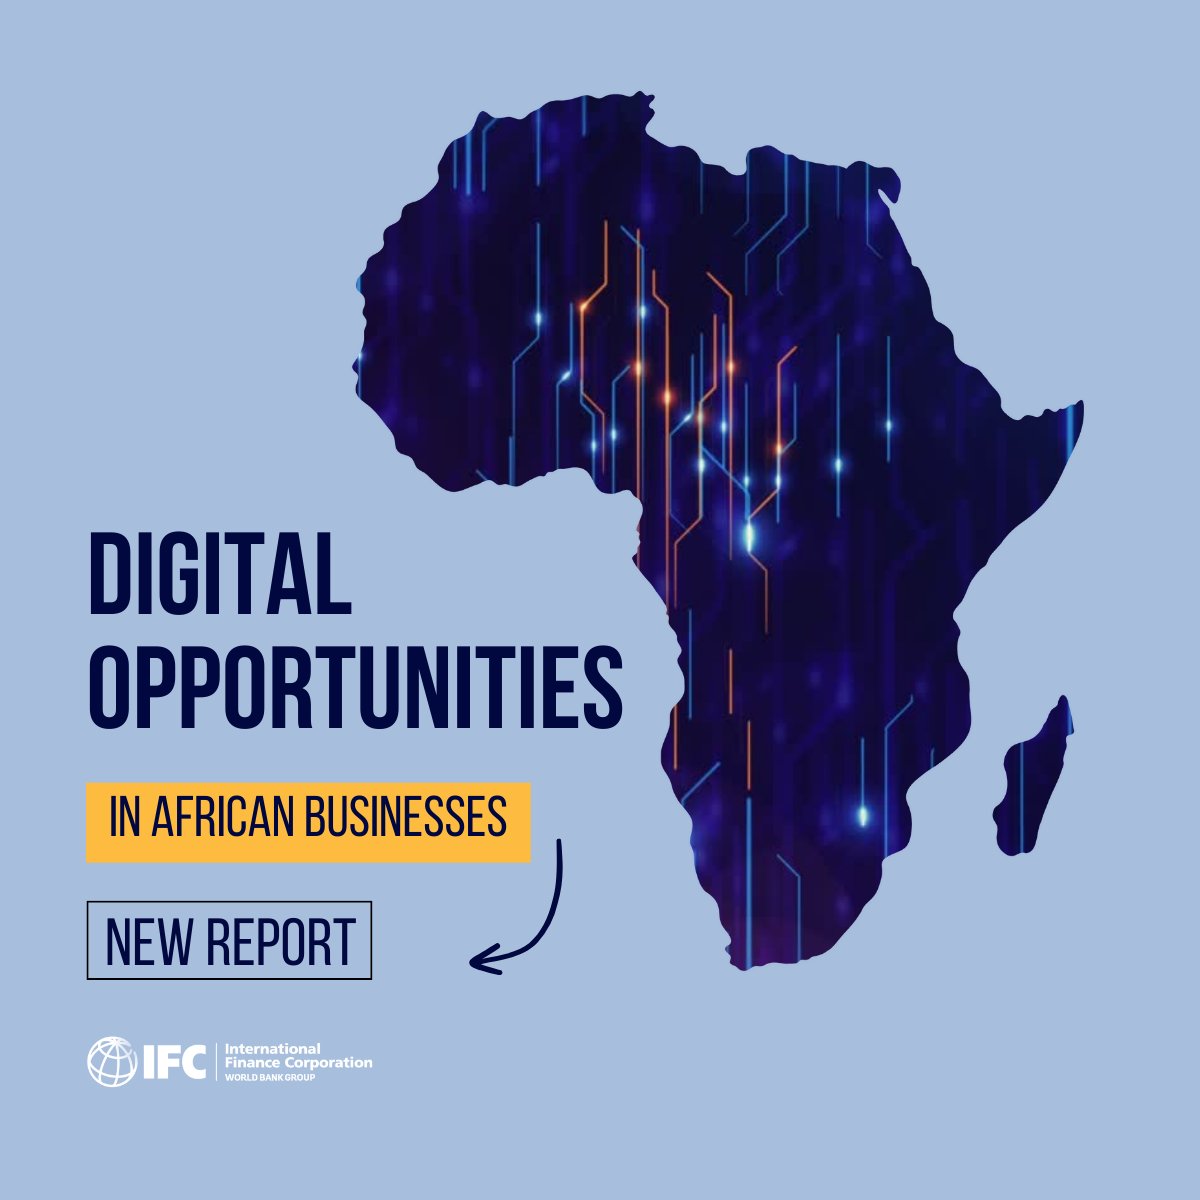 📢Calling all investors & entrepreneurs! Africa's startup ecosystem is booming. New research from IFC shows the massive market potential for digital technology startups and infrastructure. Click and be part of Africa's digital revolution: wrld.bg/3ky050RMNW4 #DigitalAfrica